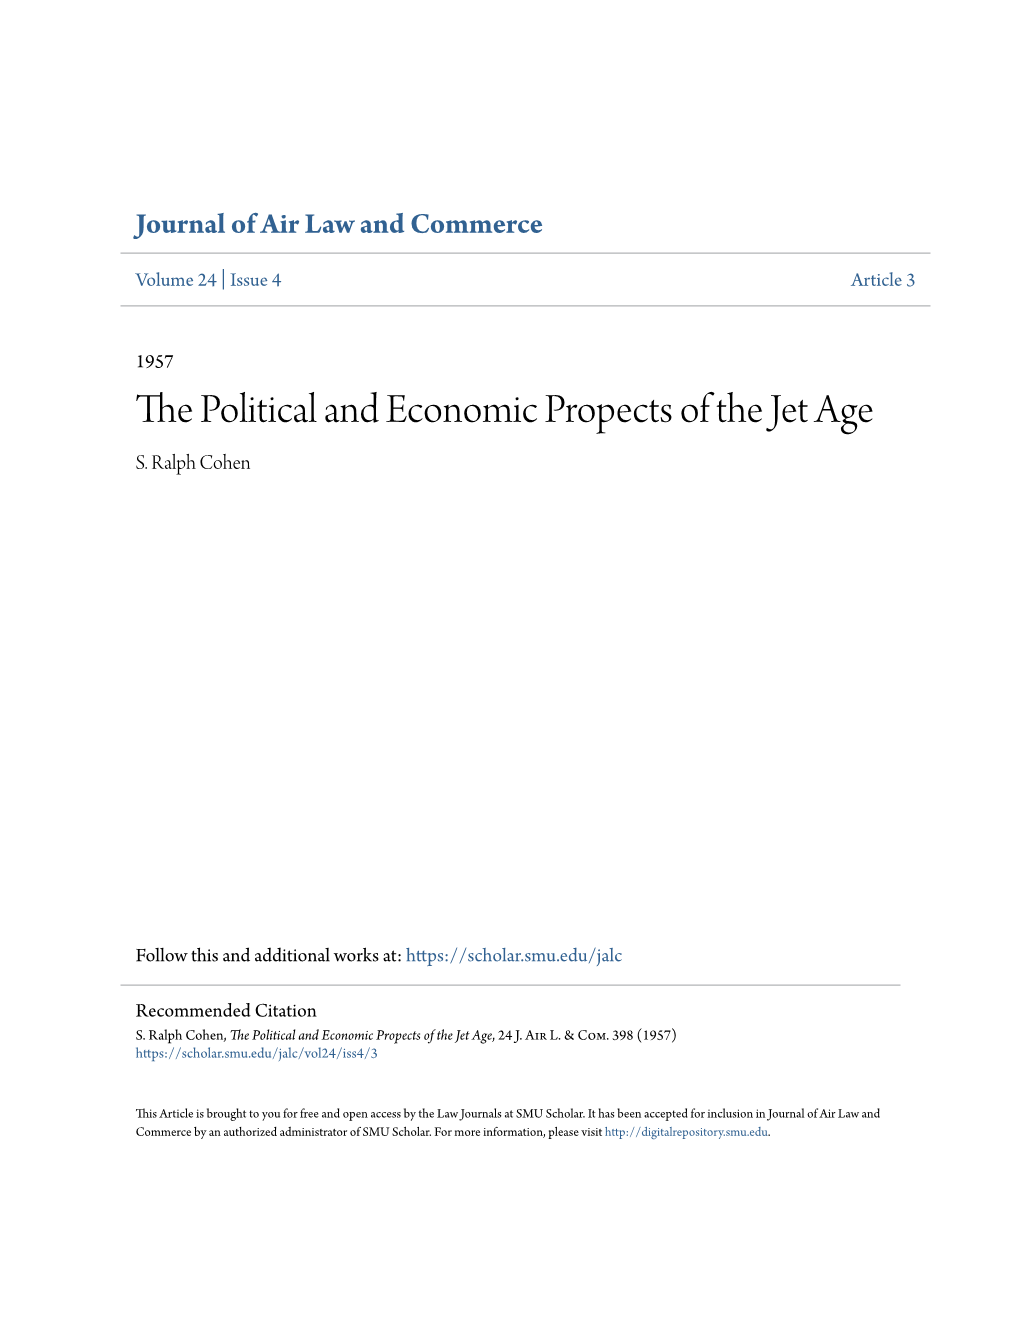 The Political and Economic Propects of the Jet Age, 24 J